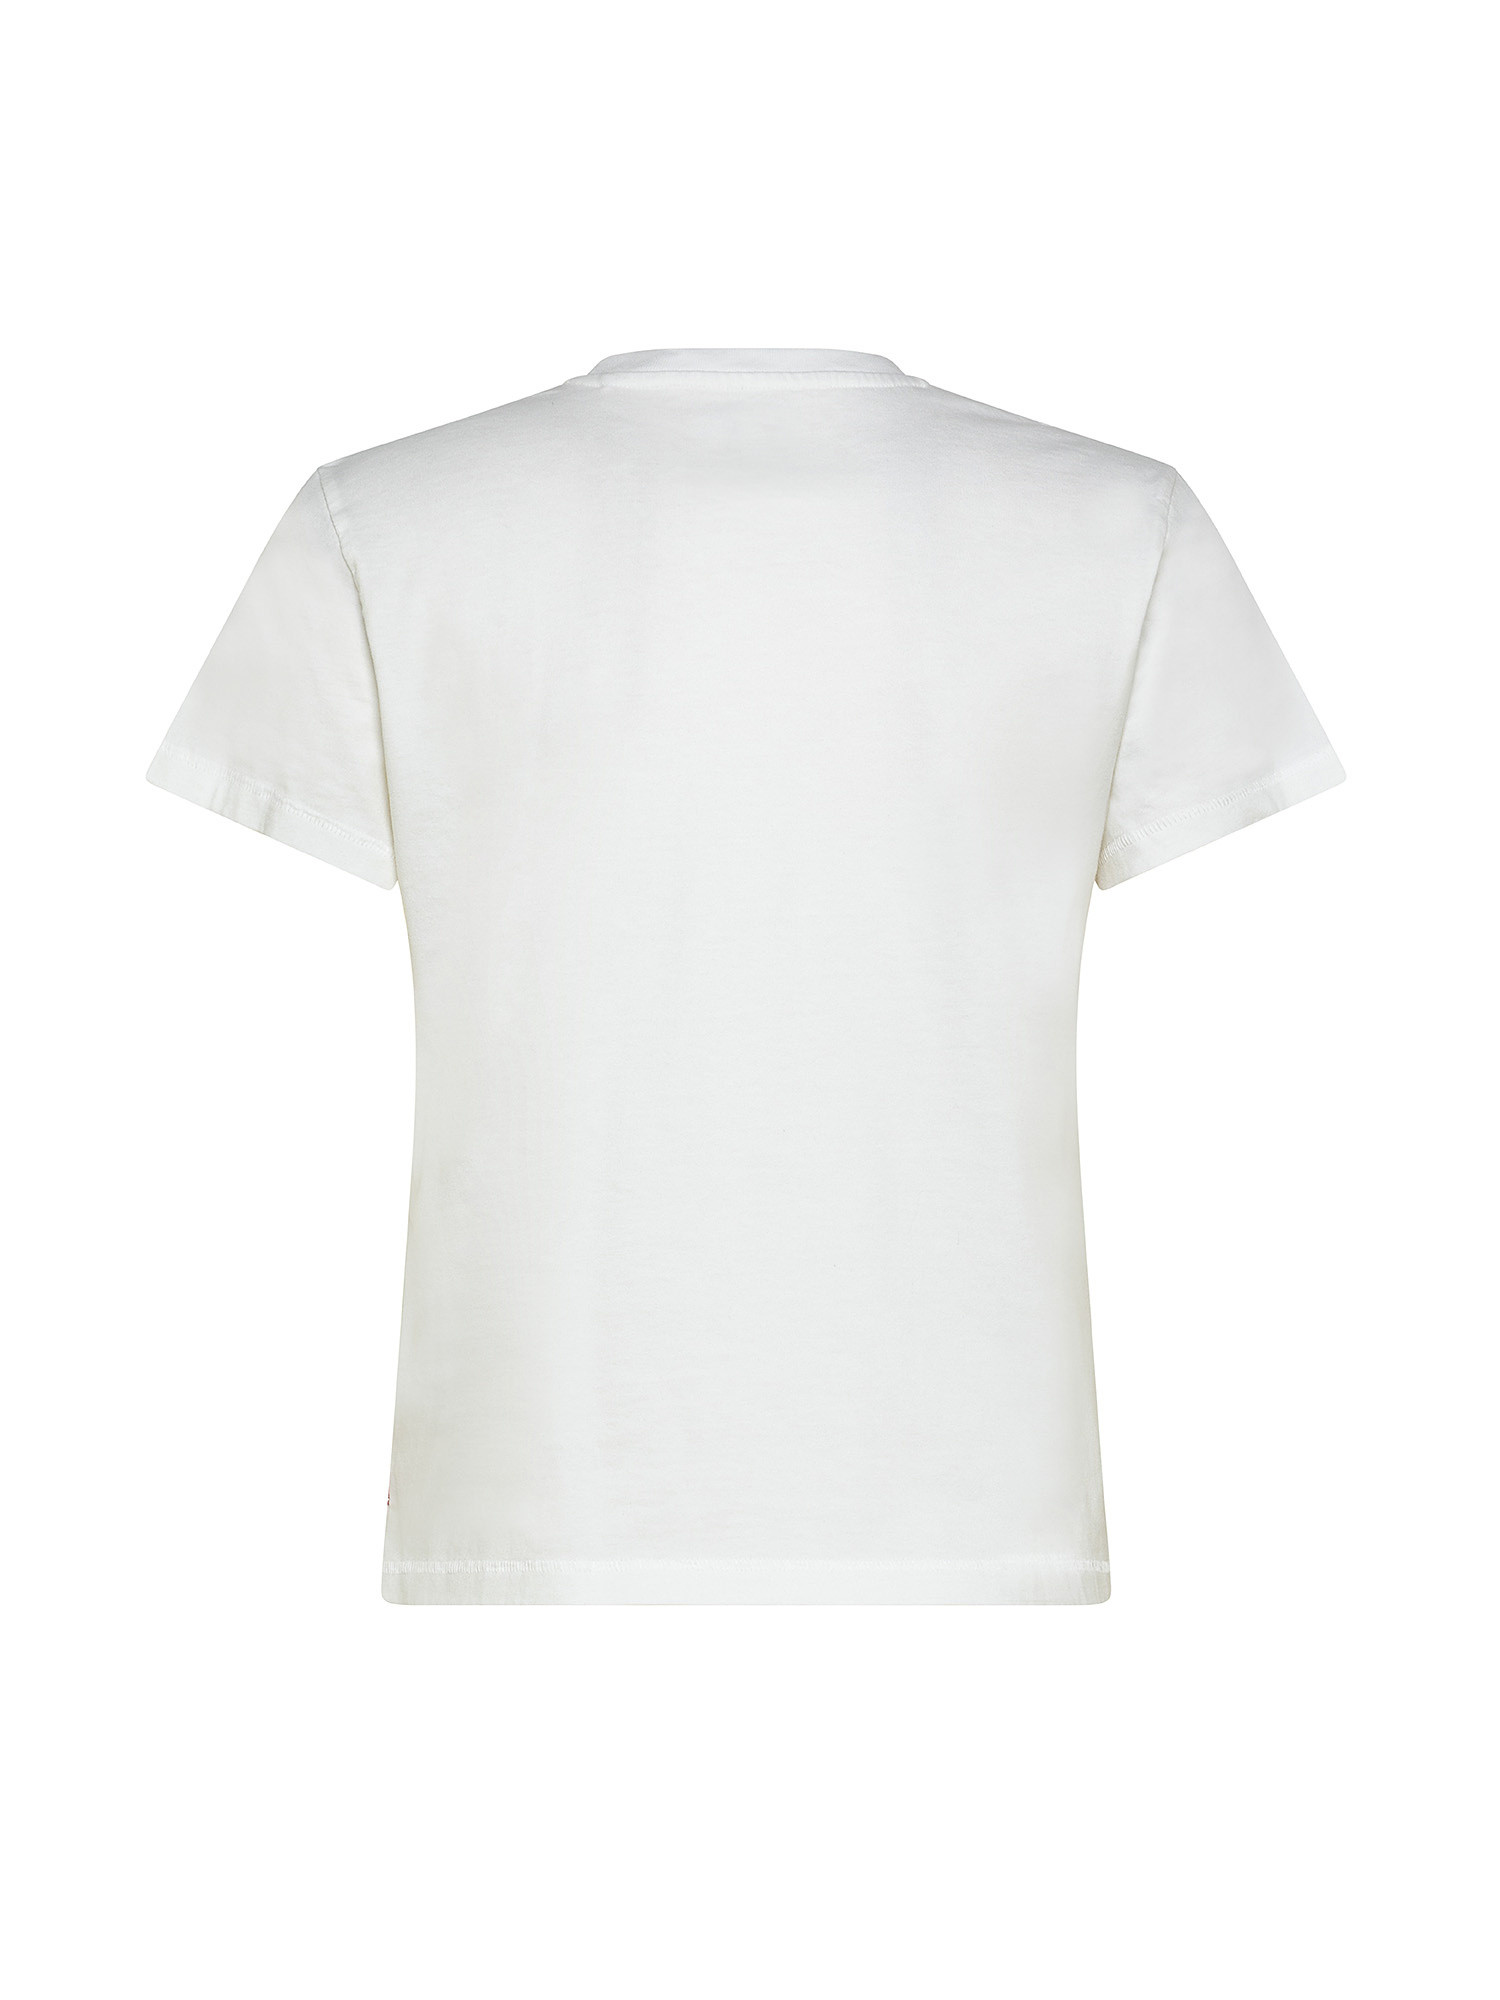 Graphic Classic Tee T-Shirt, White, large image number 2